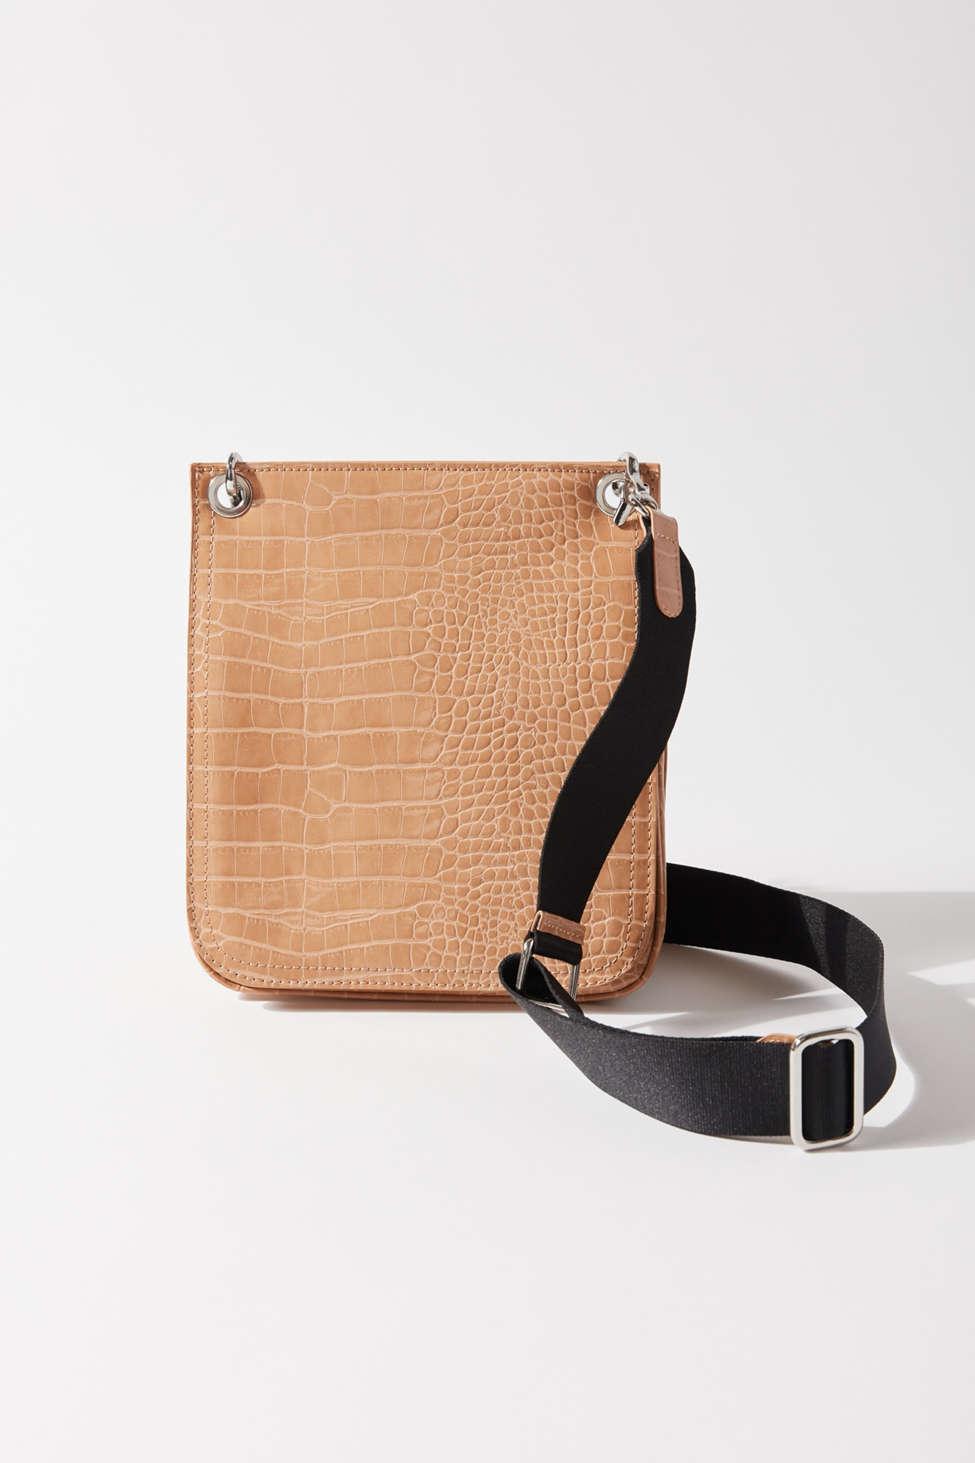 Urban Outfitters Alma Messenger Bag in Natural - Lyst